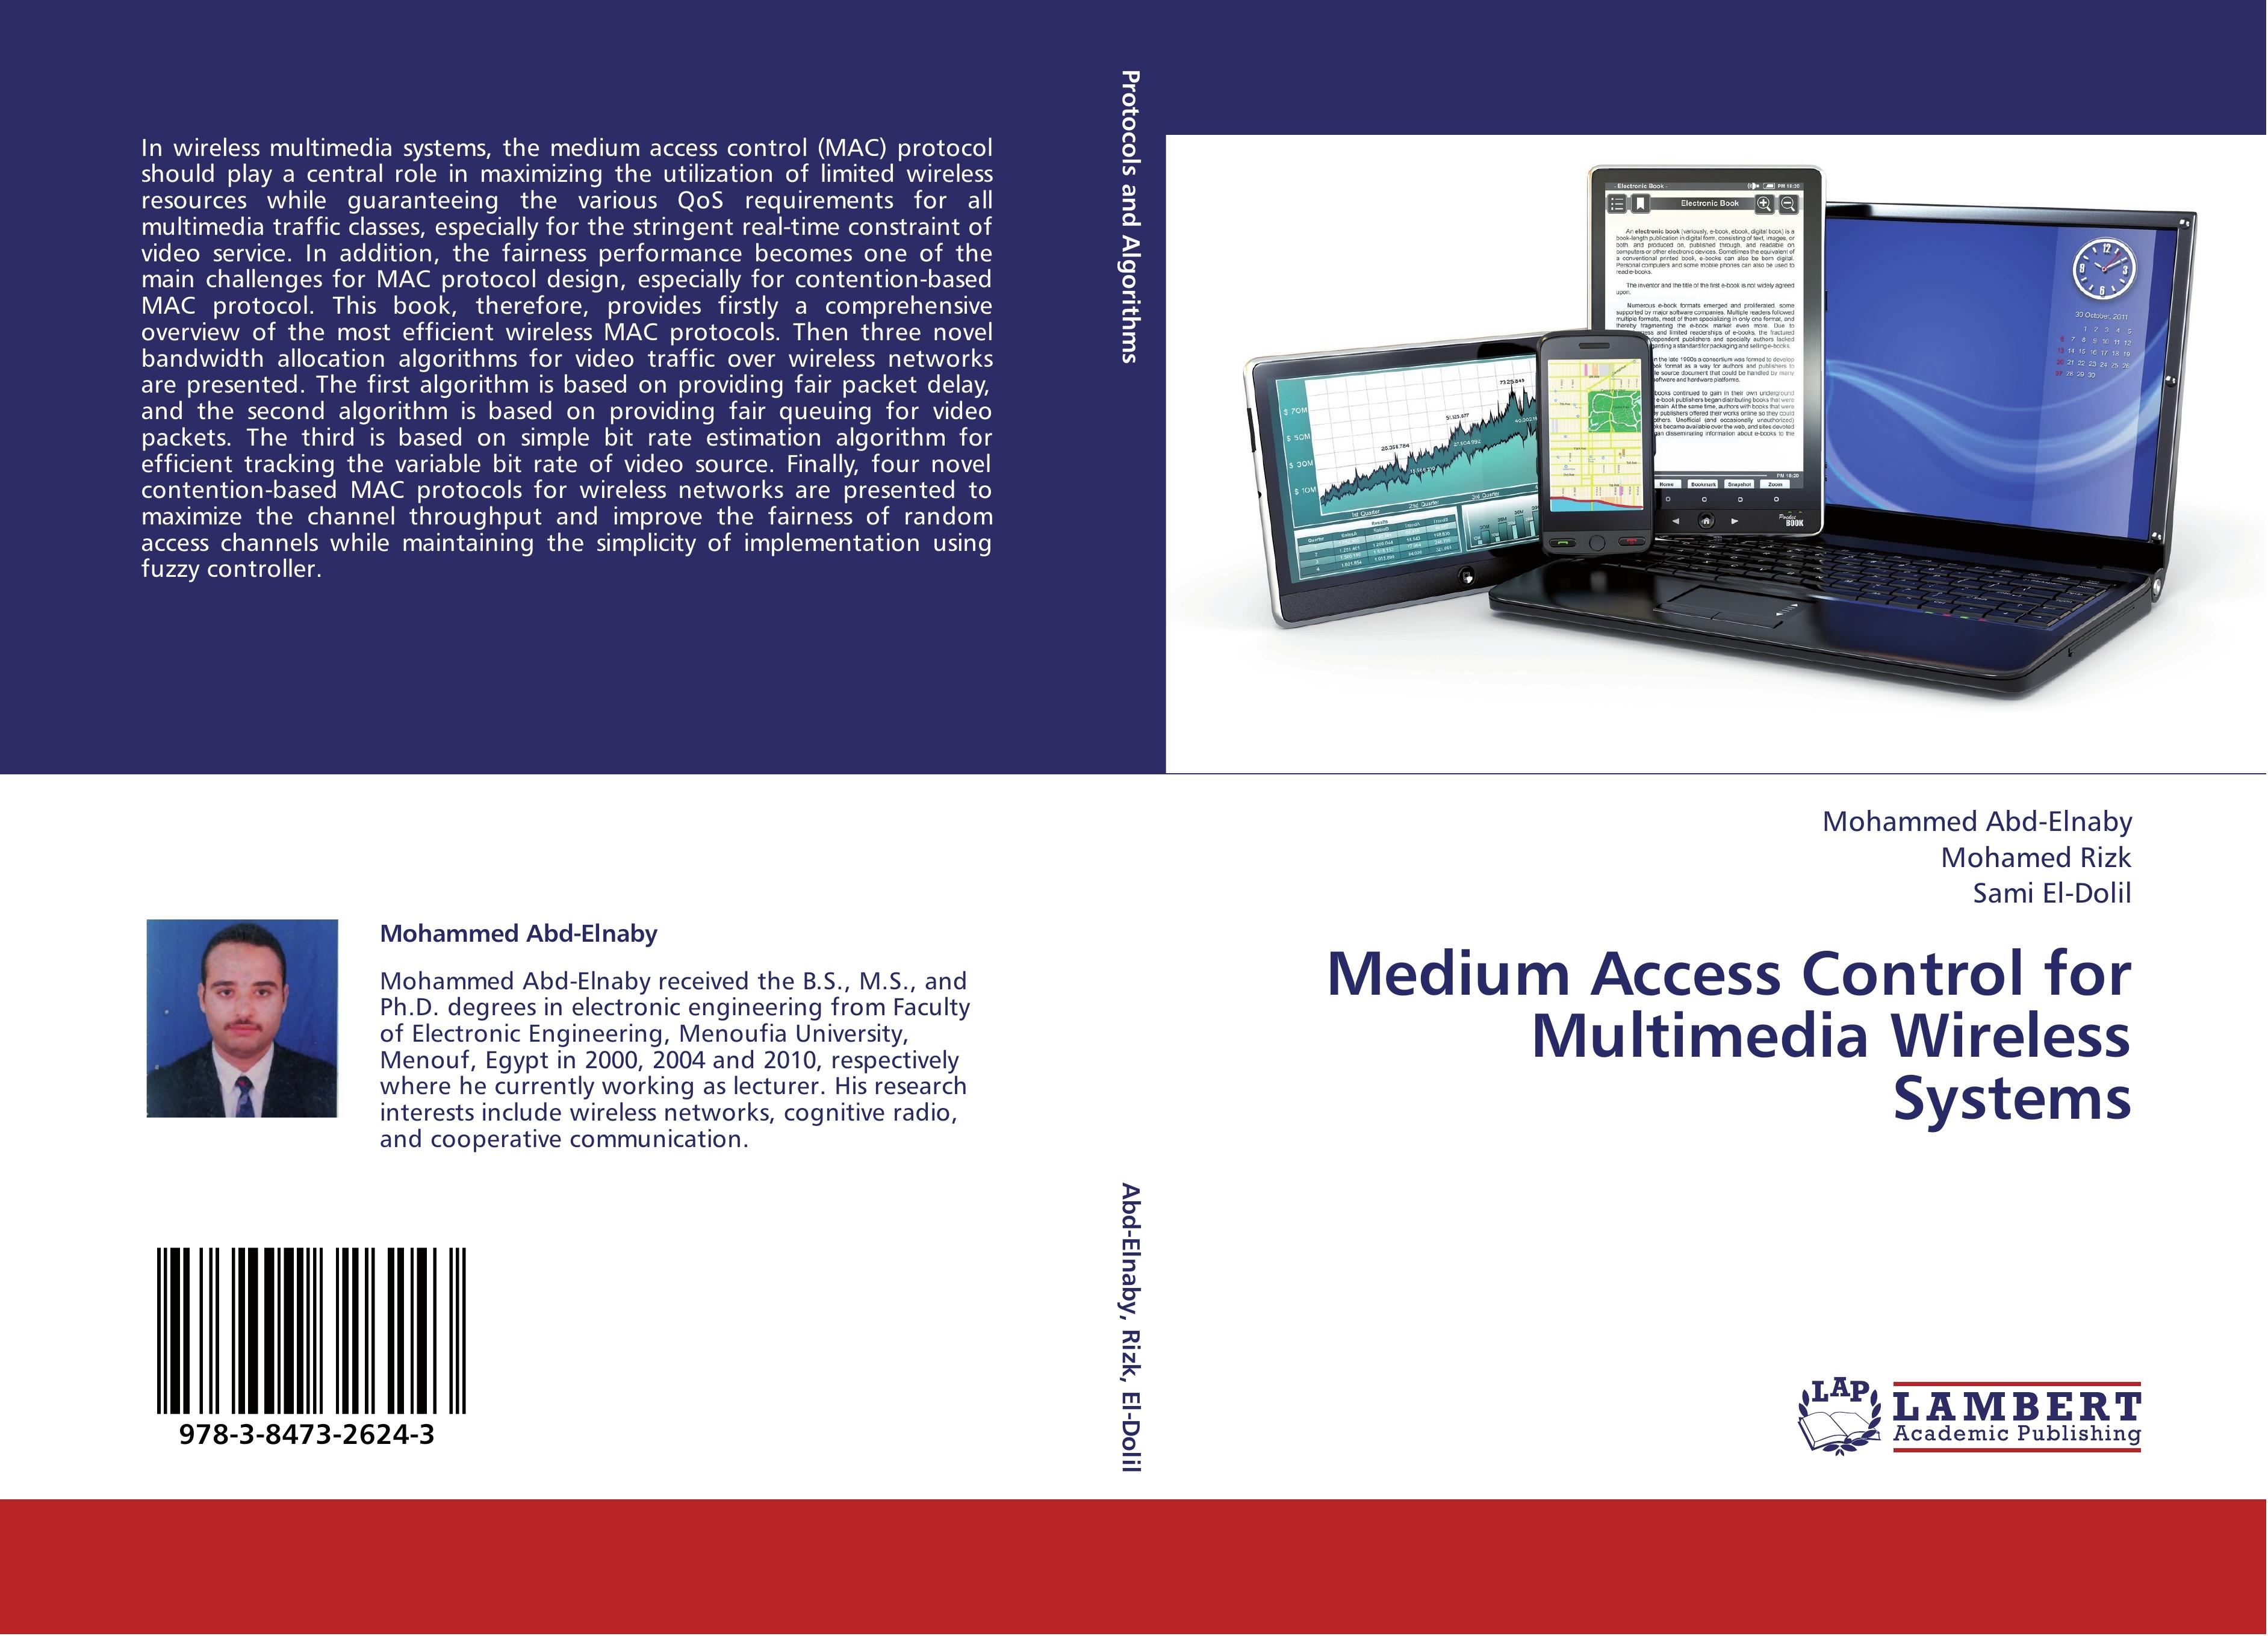 Medium Access Control for Multimedia Wireless Systems - Mohammed Abd-Elnaby|Mohamed Rizk|Sami El-Dolil